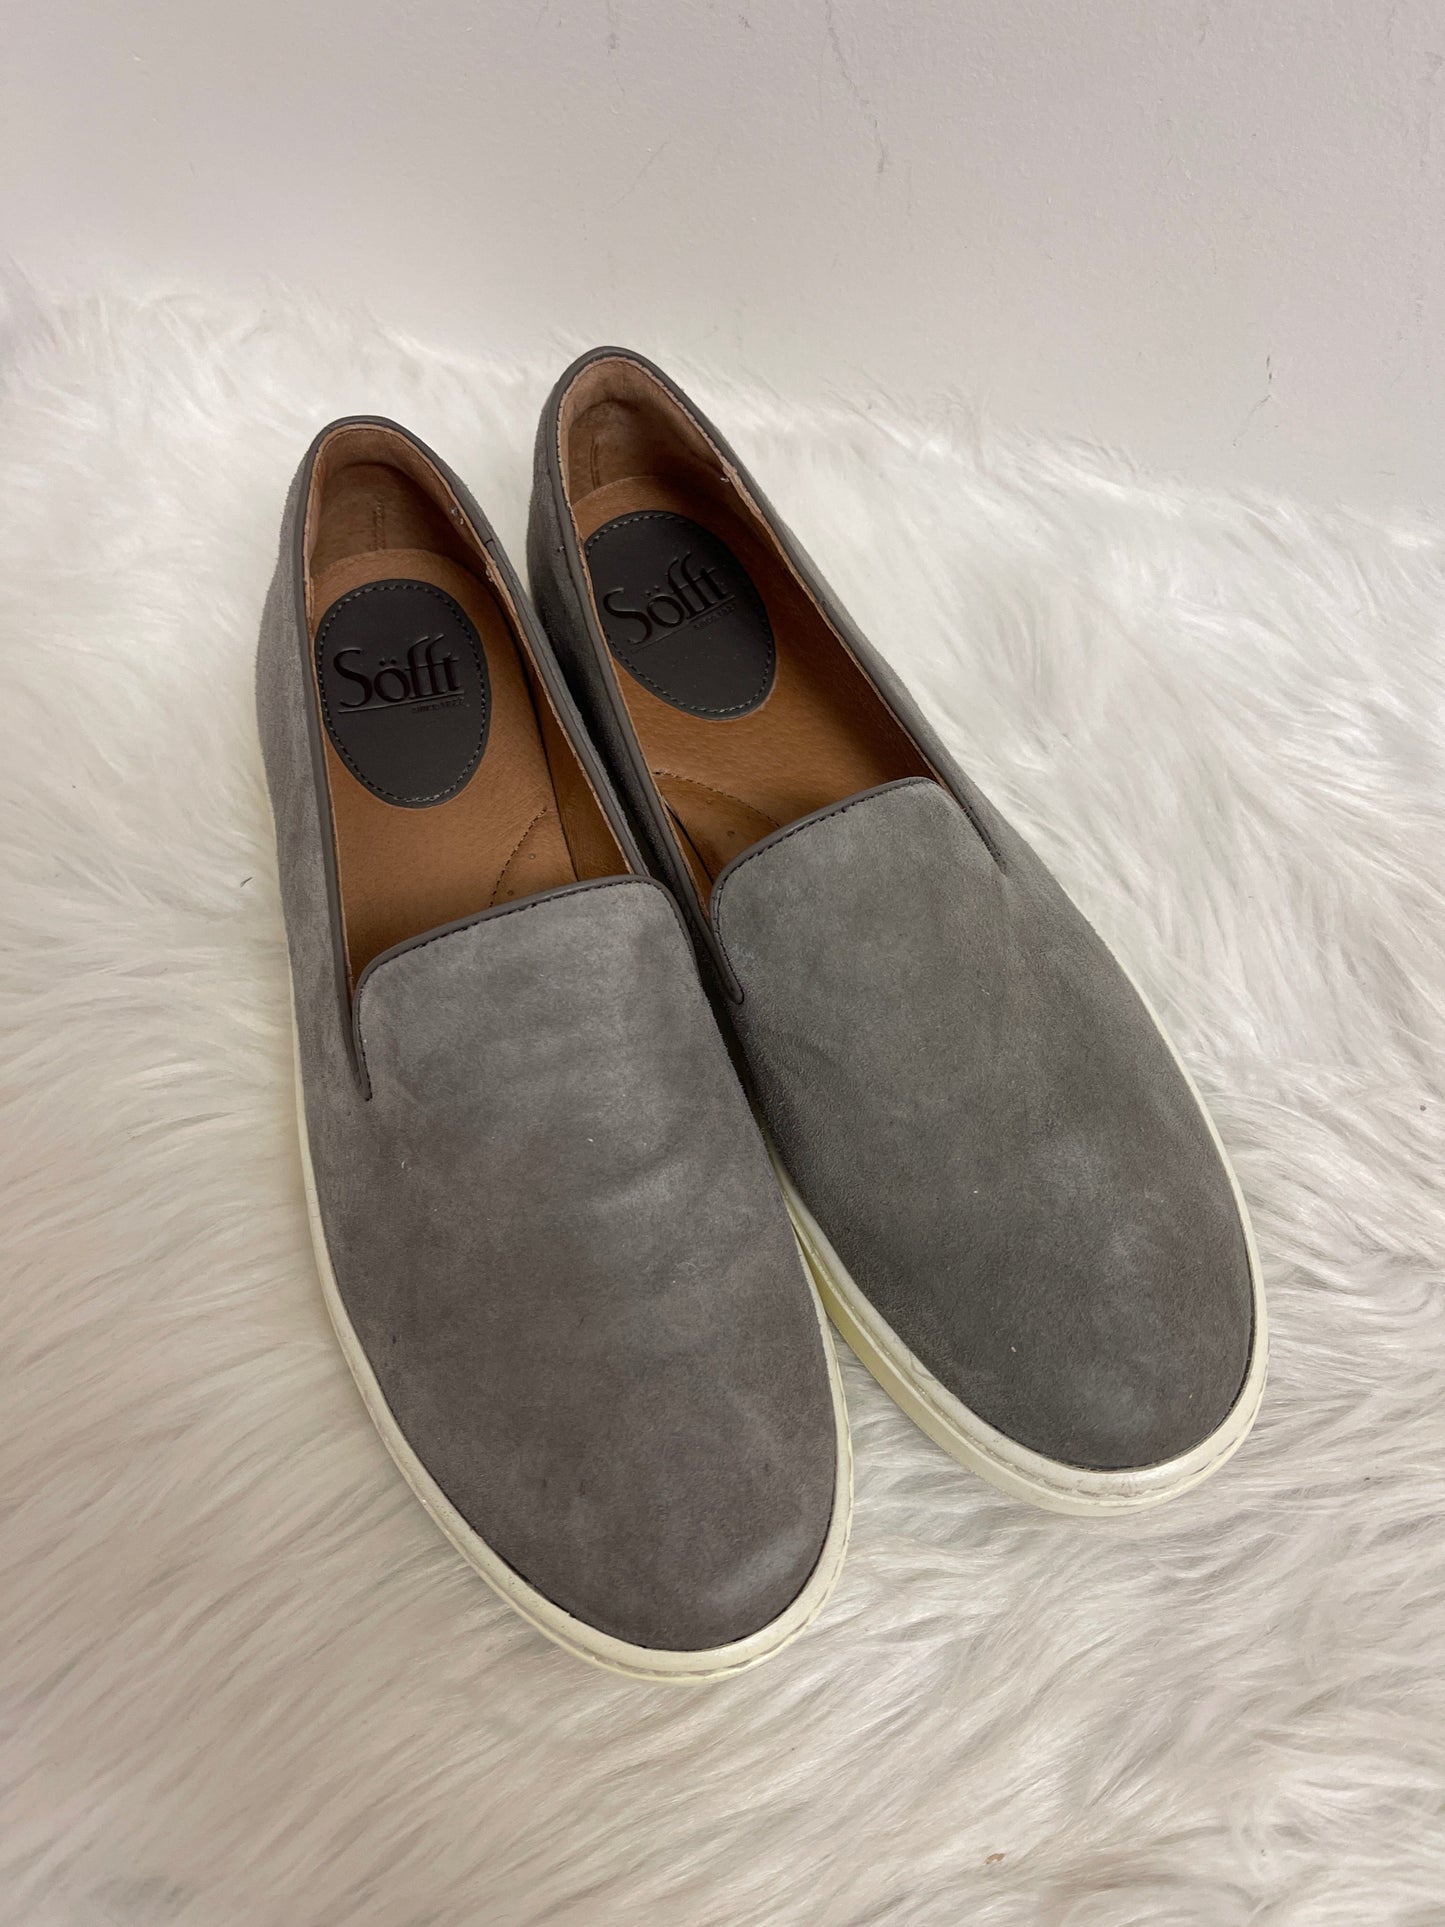 Grey Shoes Flats Sofft, Size 8.5